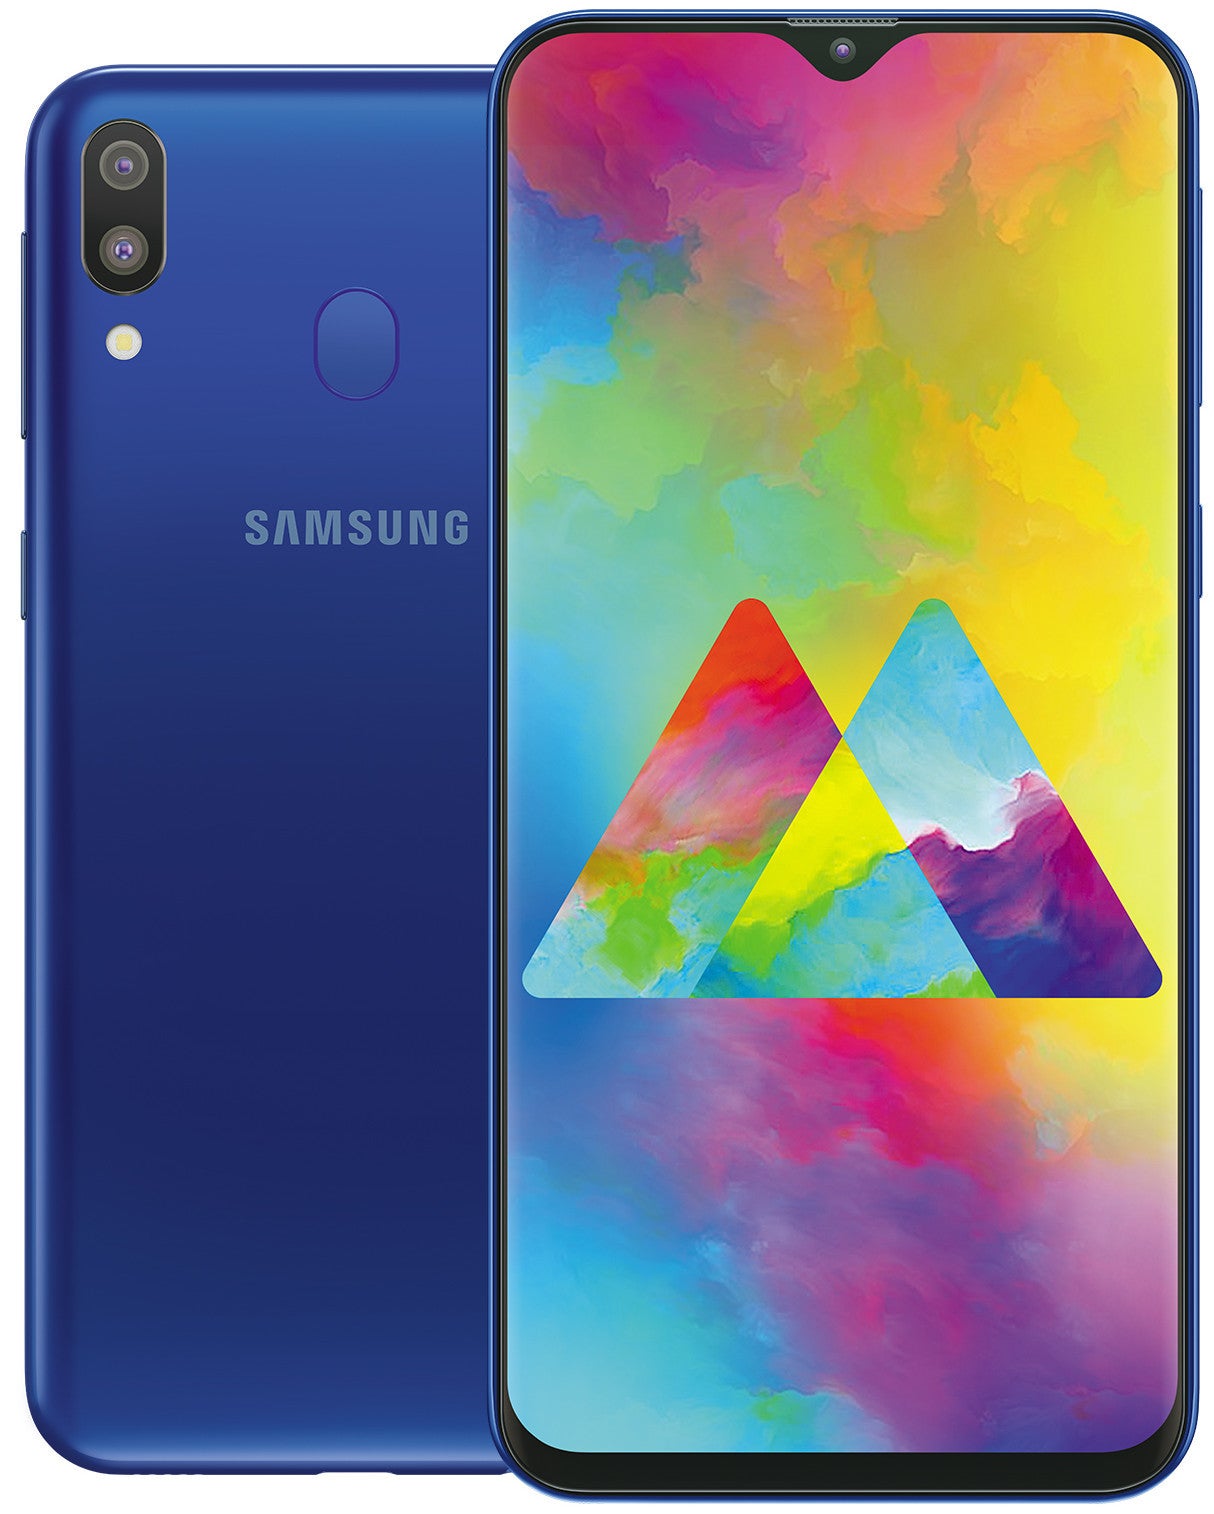 Galaxy M20 - Samsung gives in to the notch with the new M-series, Galaxy M20 touts a 5000 mAh battery